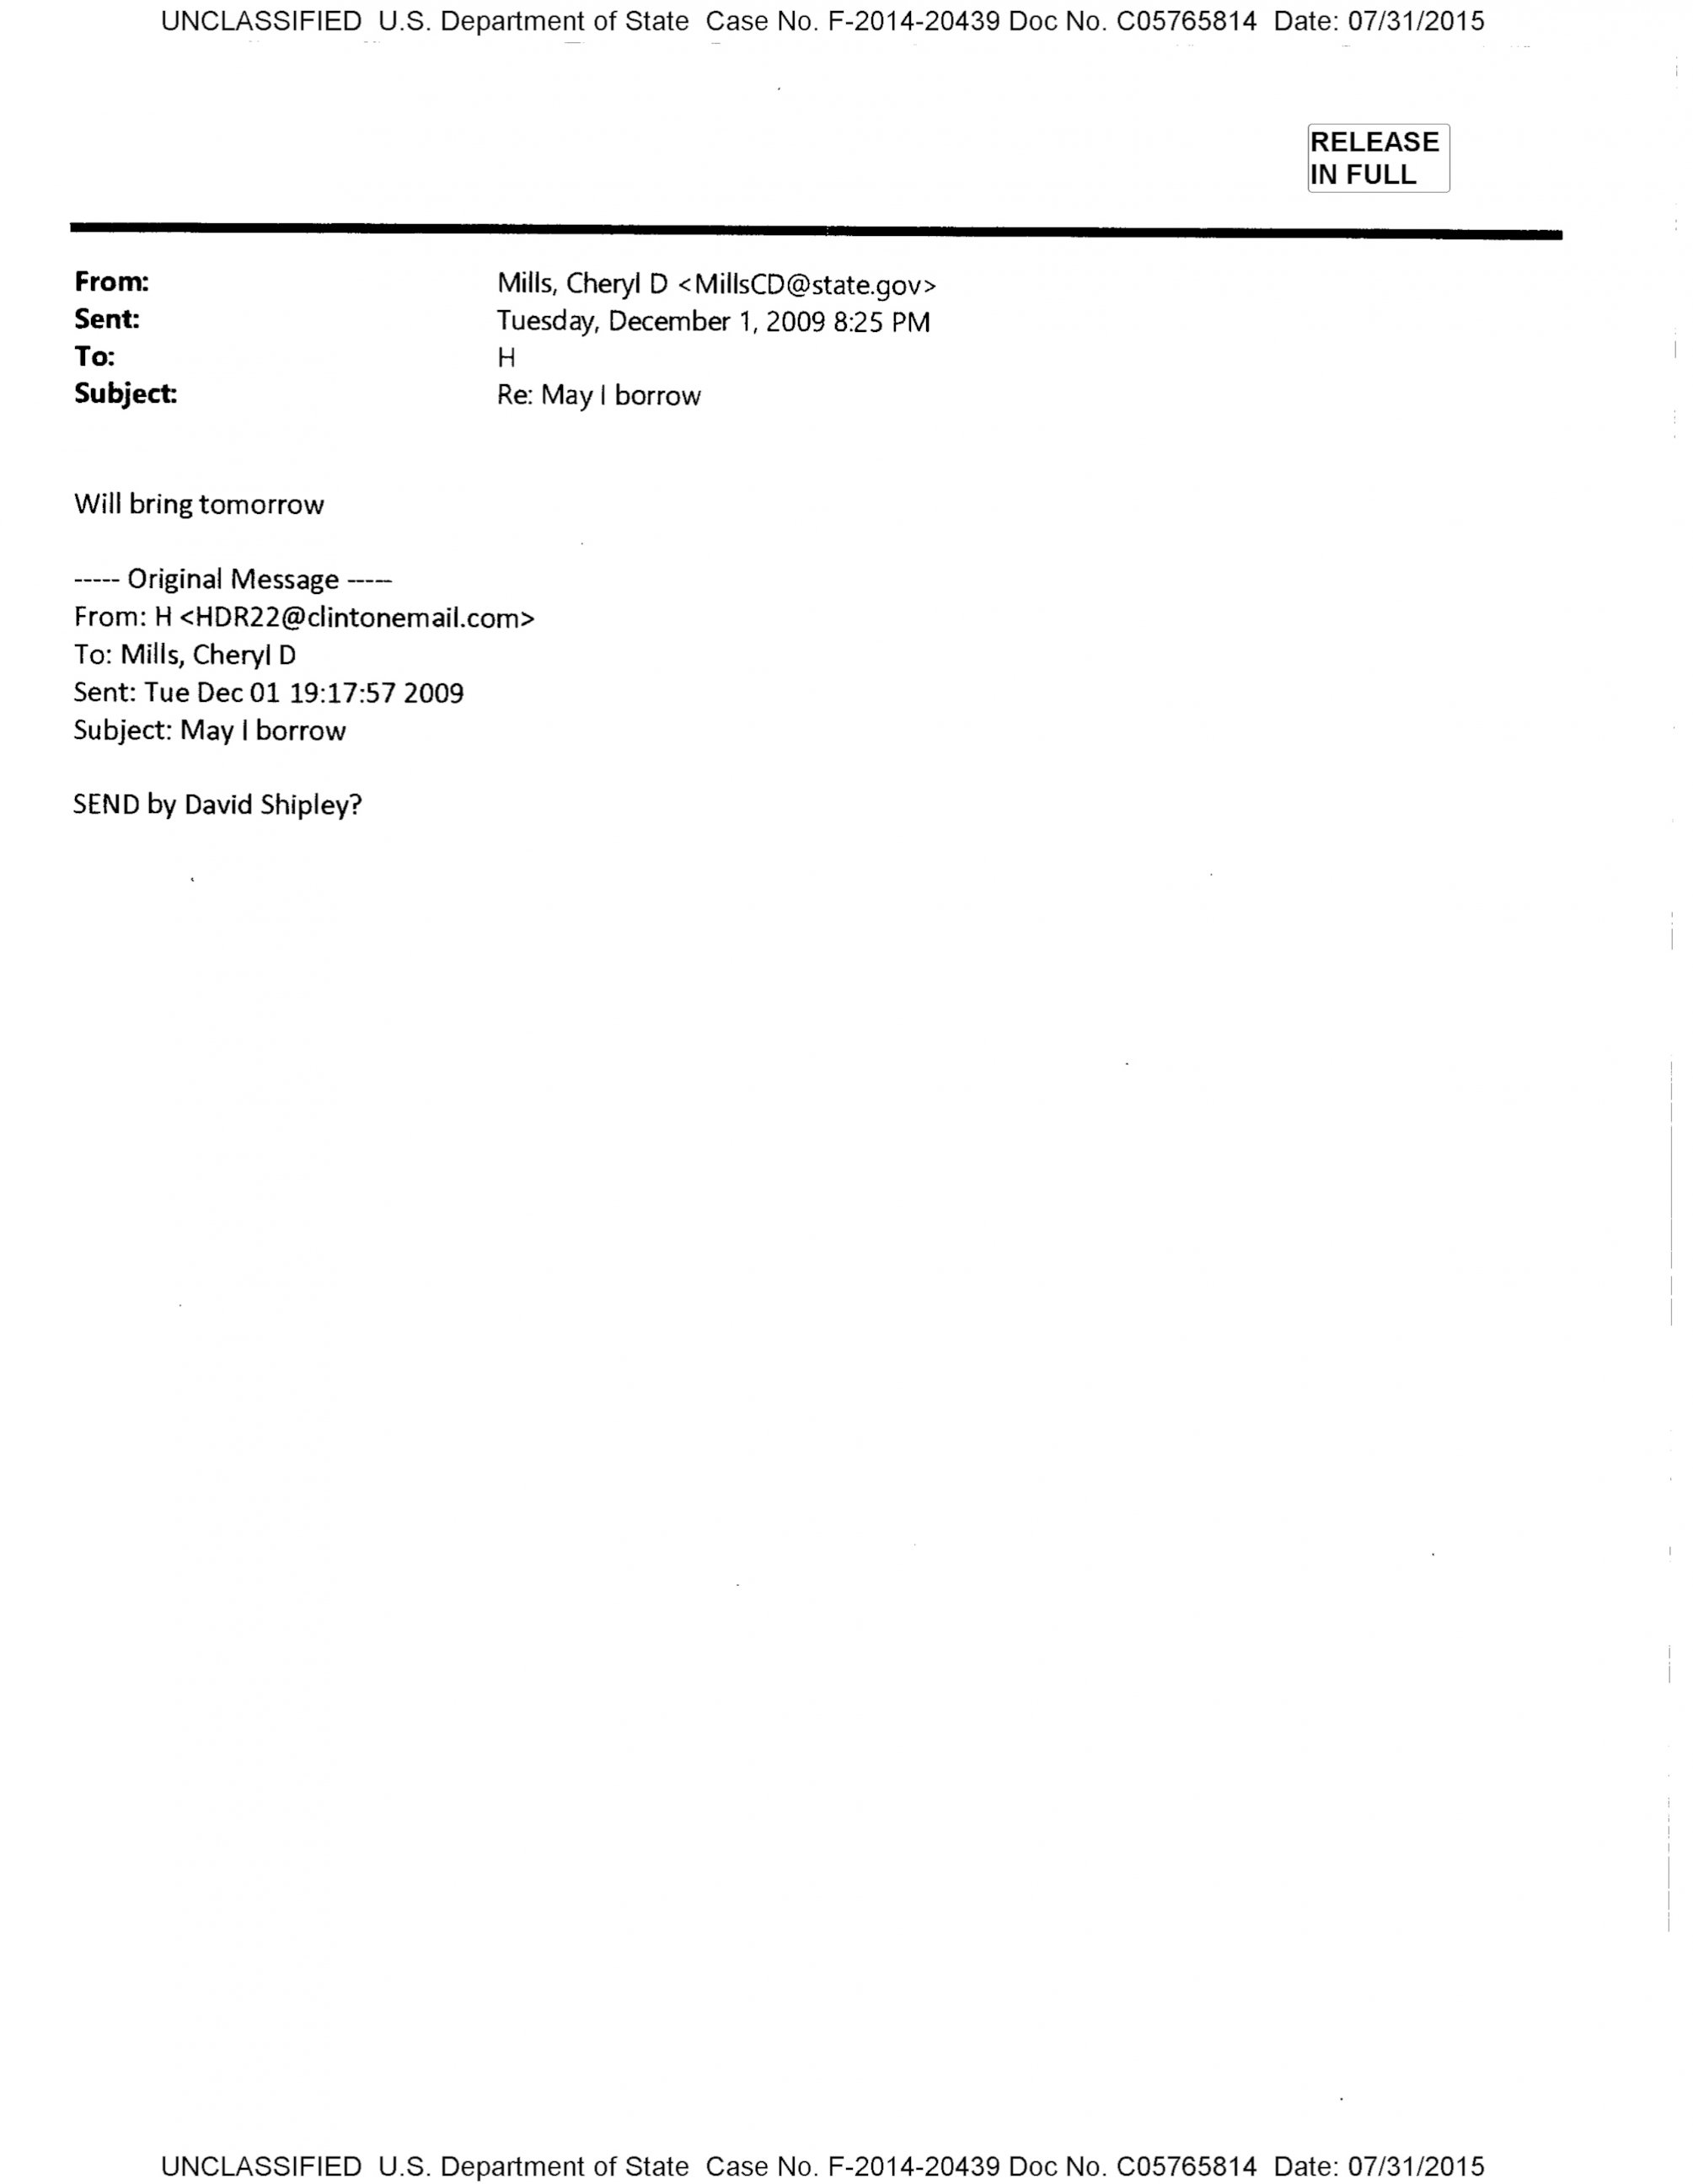 PHOTO:An email exchange between Hilary Clinton and Cheryl Mills from Dec.1, 2009.  